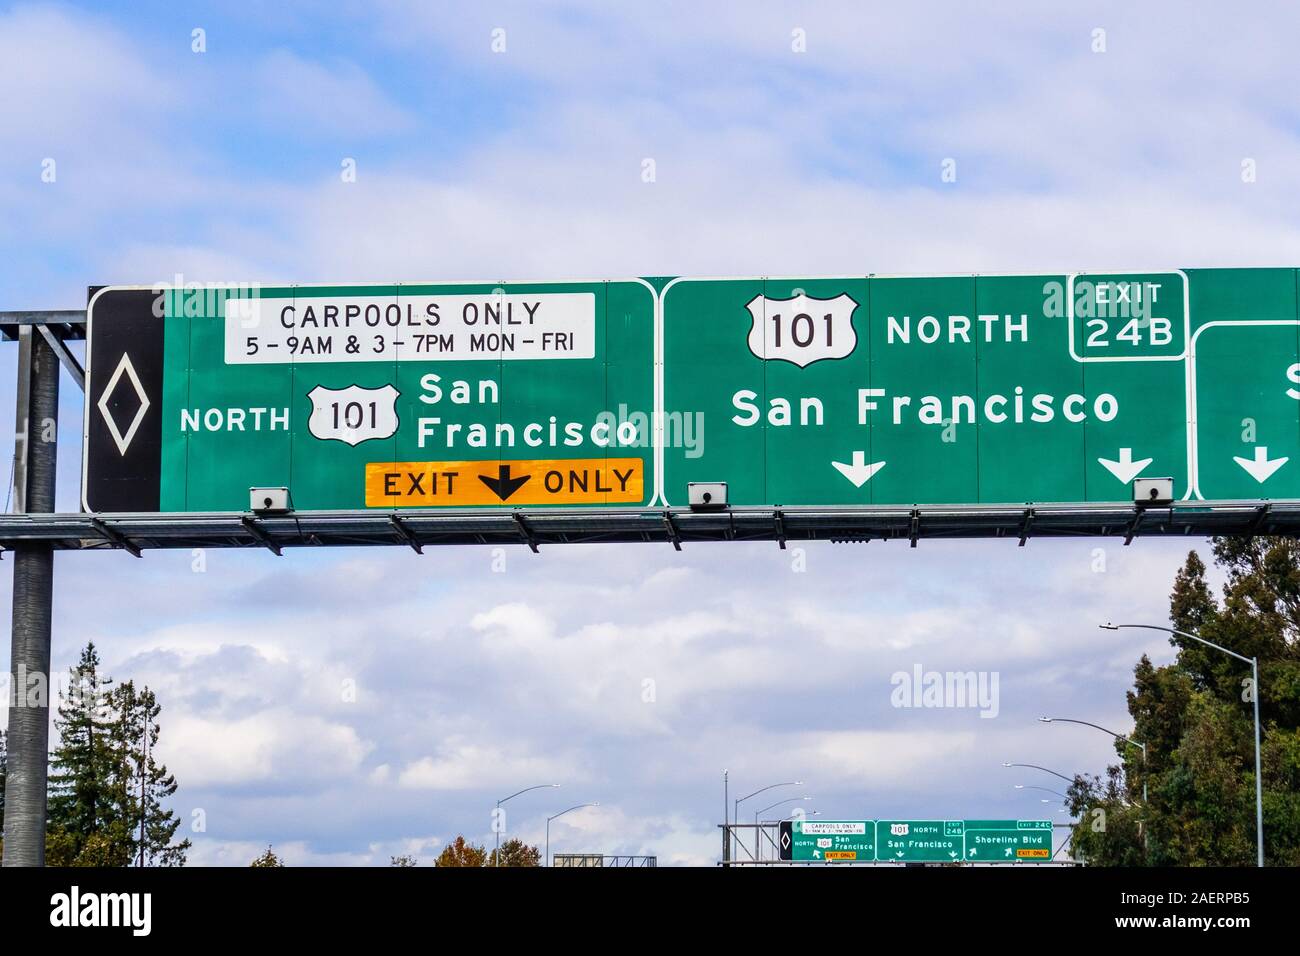 Freeway 101 northbound to San Francisco signage providing directions and the applicable carpool rules; San Francisco bay area, California Stock Photo